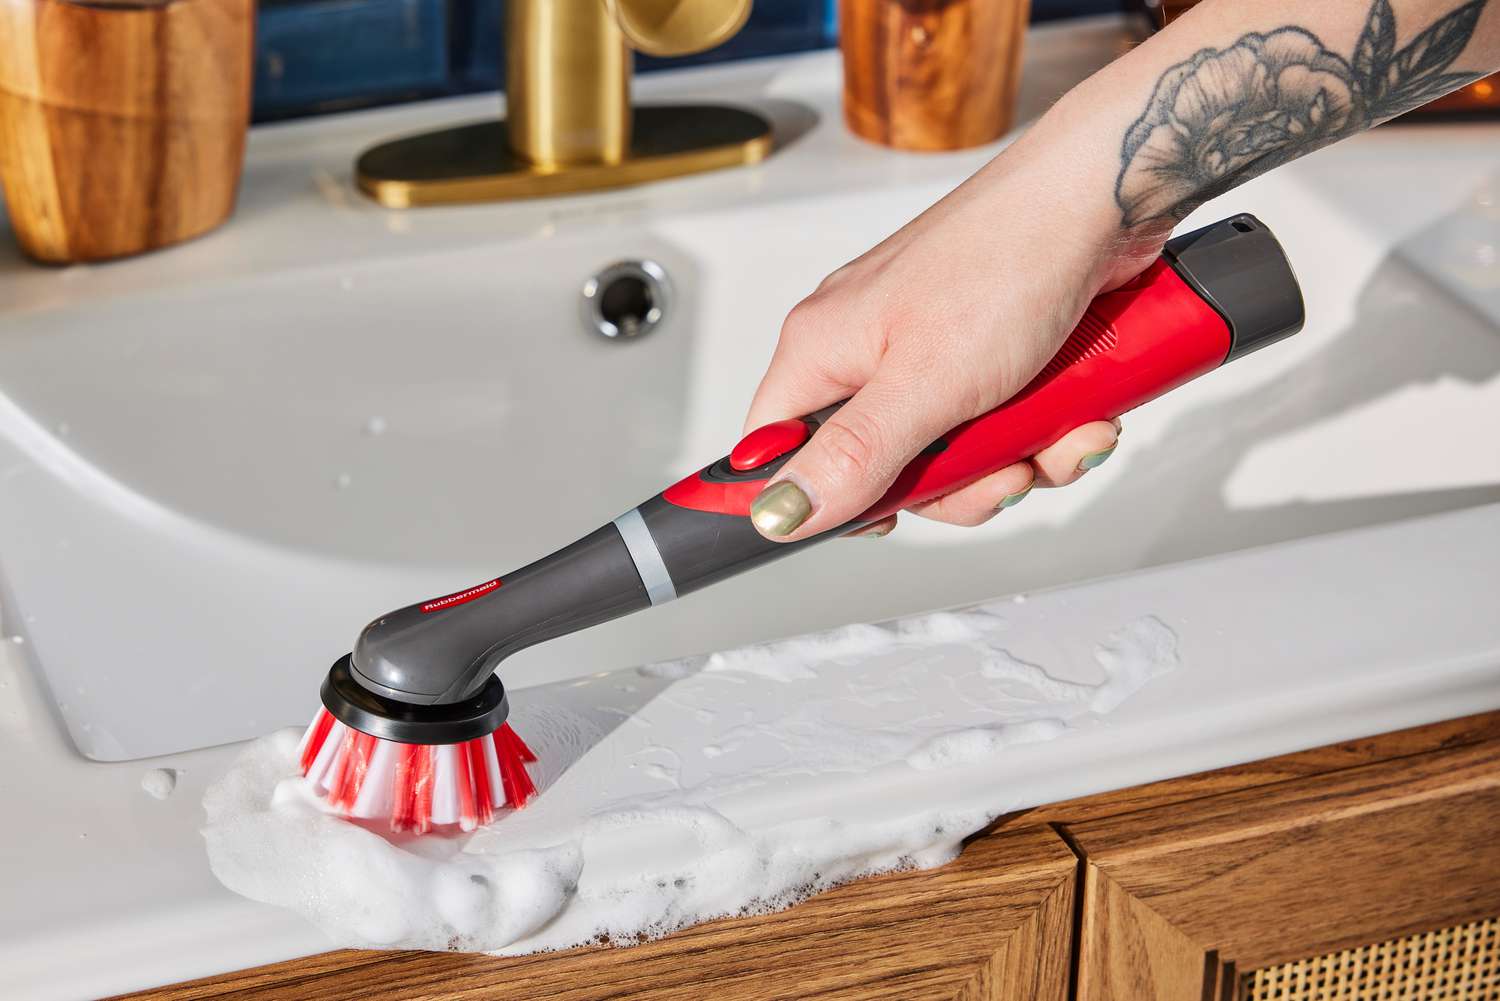 Hand holding the Rubbermaid Reveal Power Scrubber to clean a soapy bathroom sink